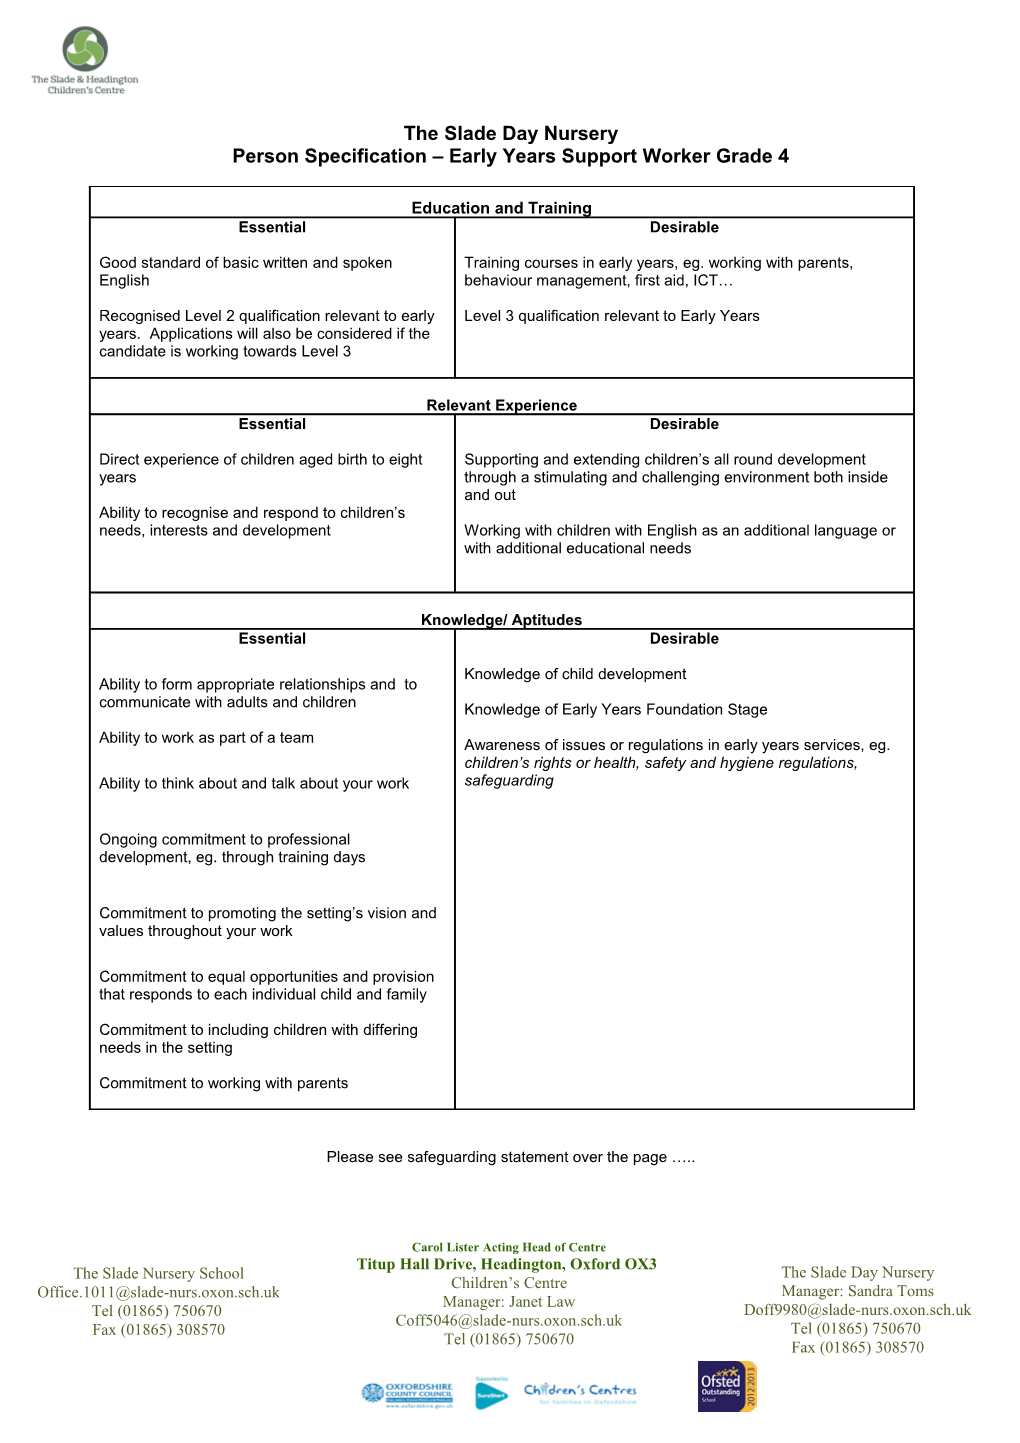 Person Specification Early Years Support Worker Grade 4